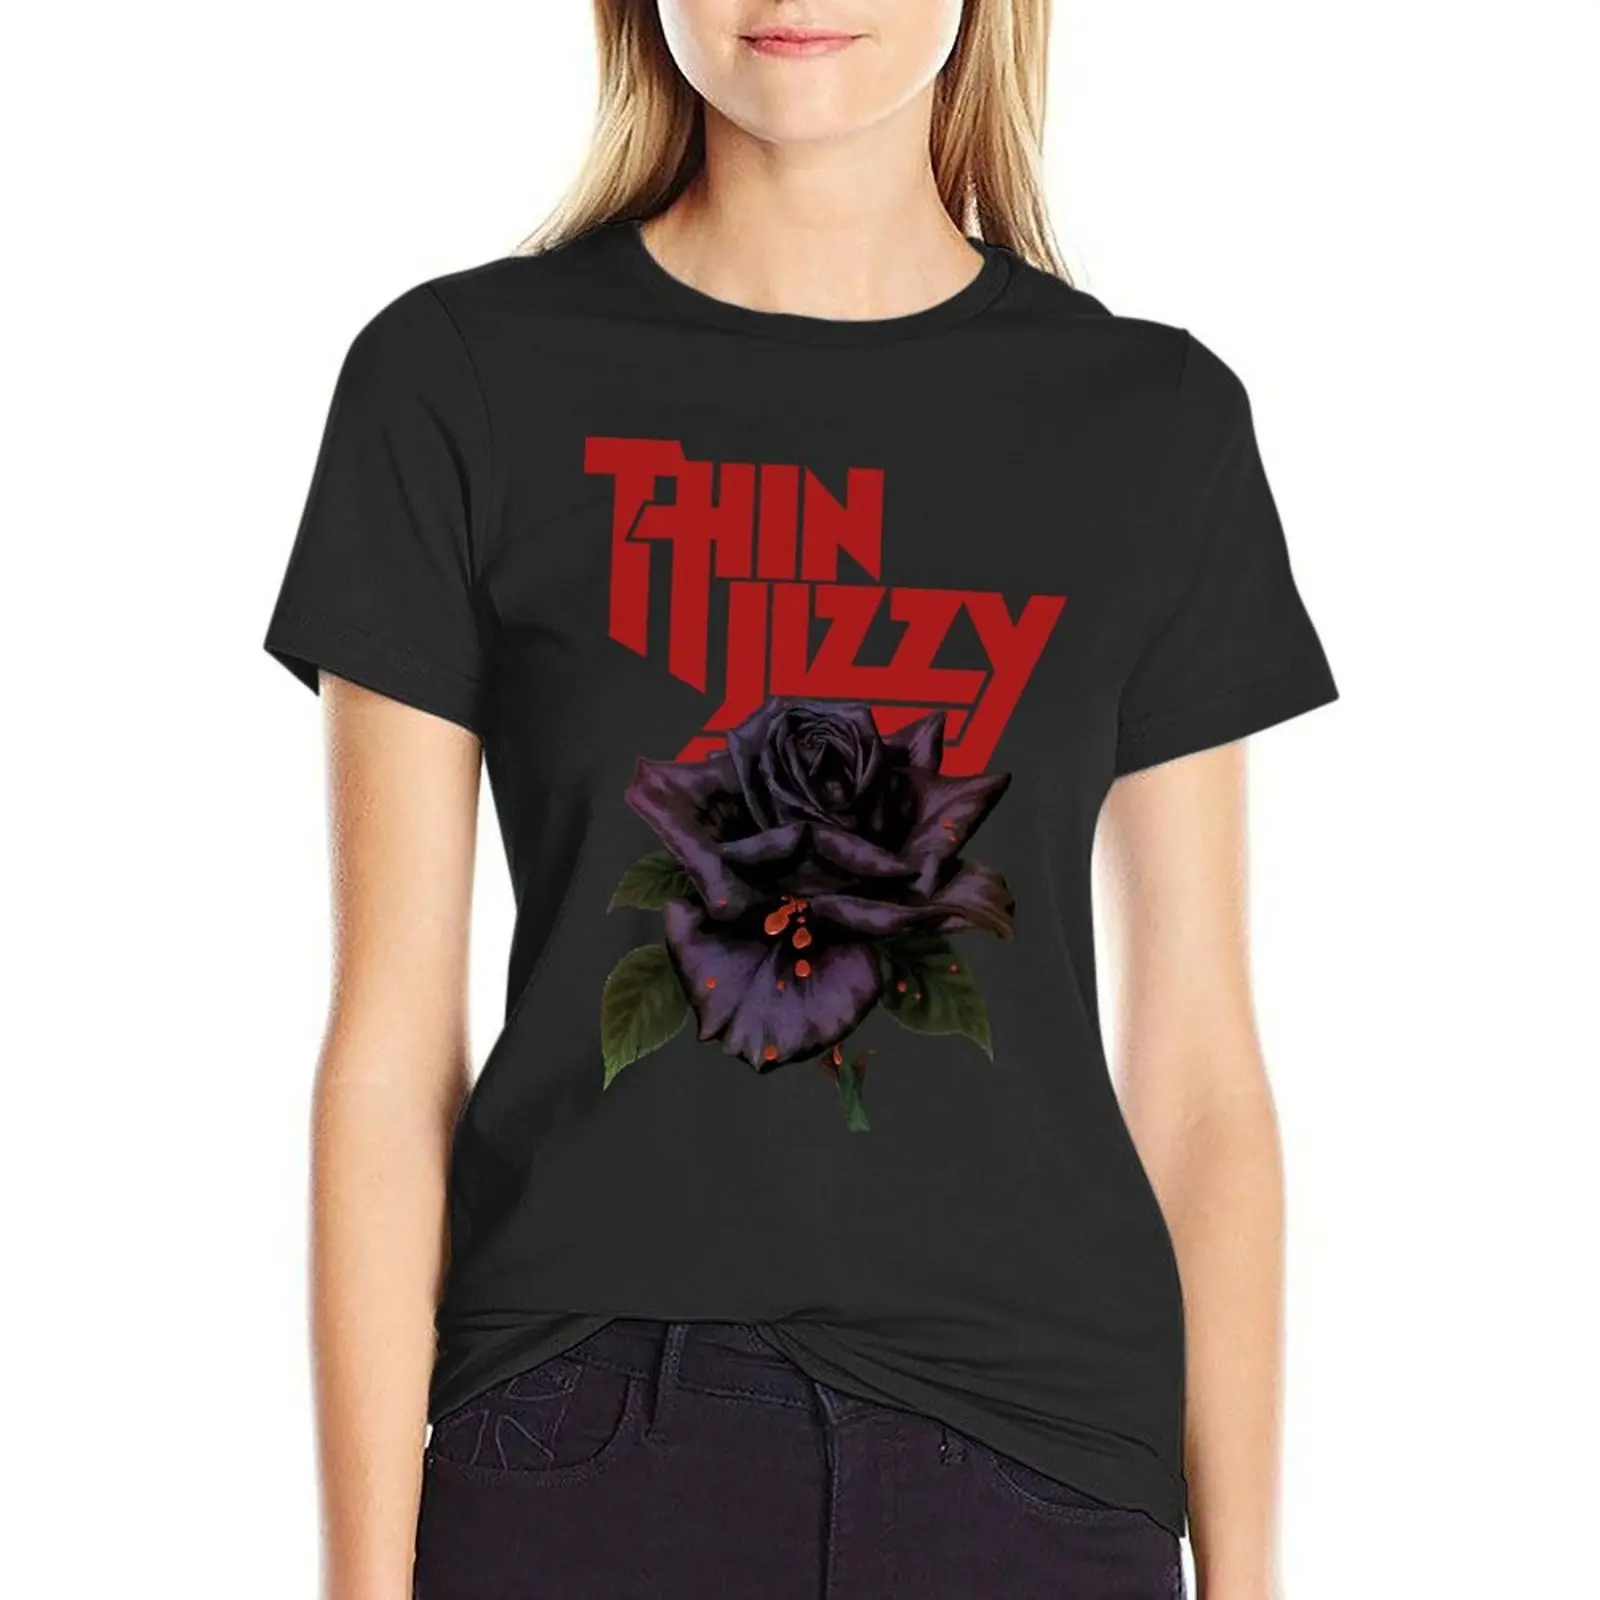 

New Black Rose thin Lizzy T-shirt funny aesthetic clothes t shirt for Women